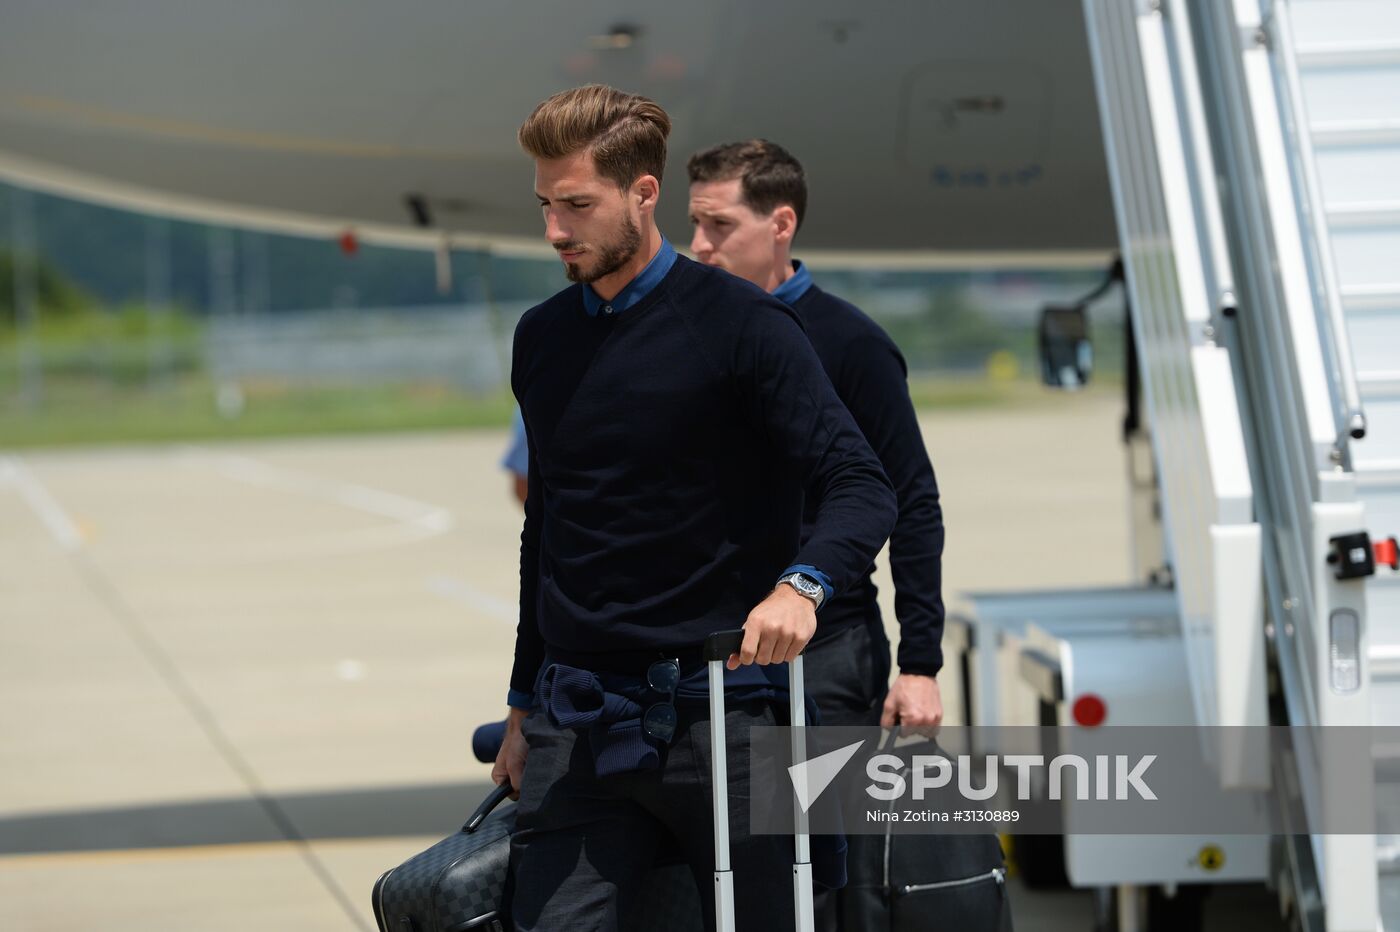 Germany national football team arrives at 2017 Confederations Cup